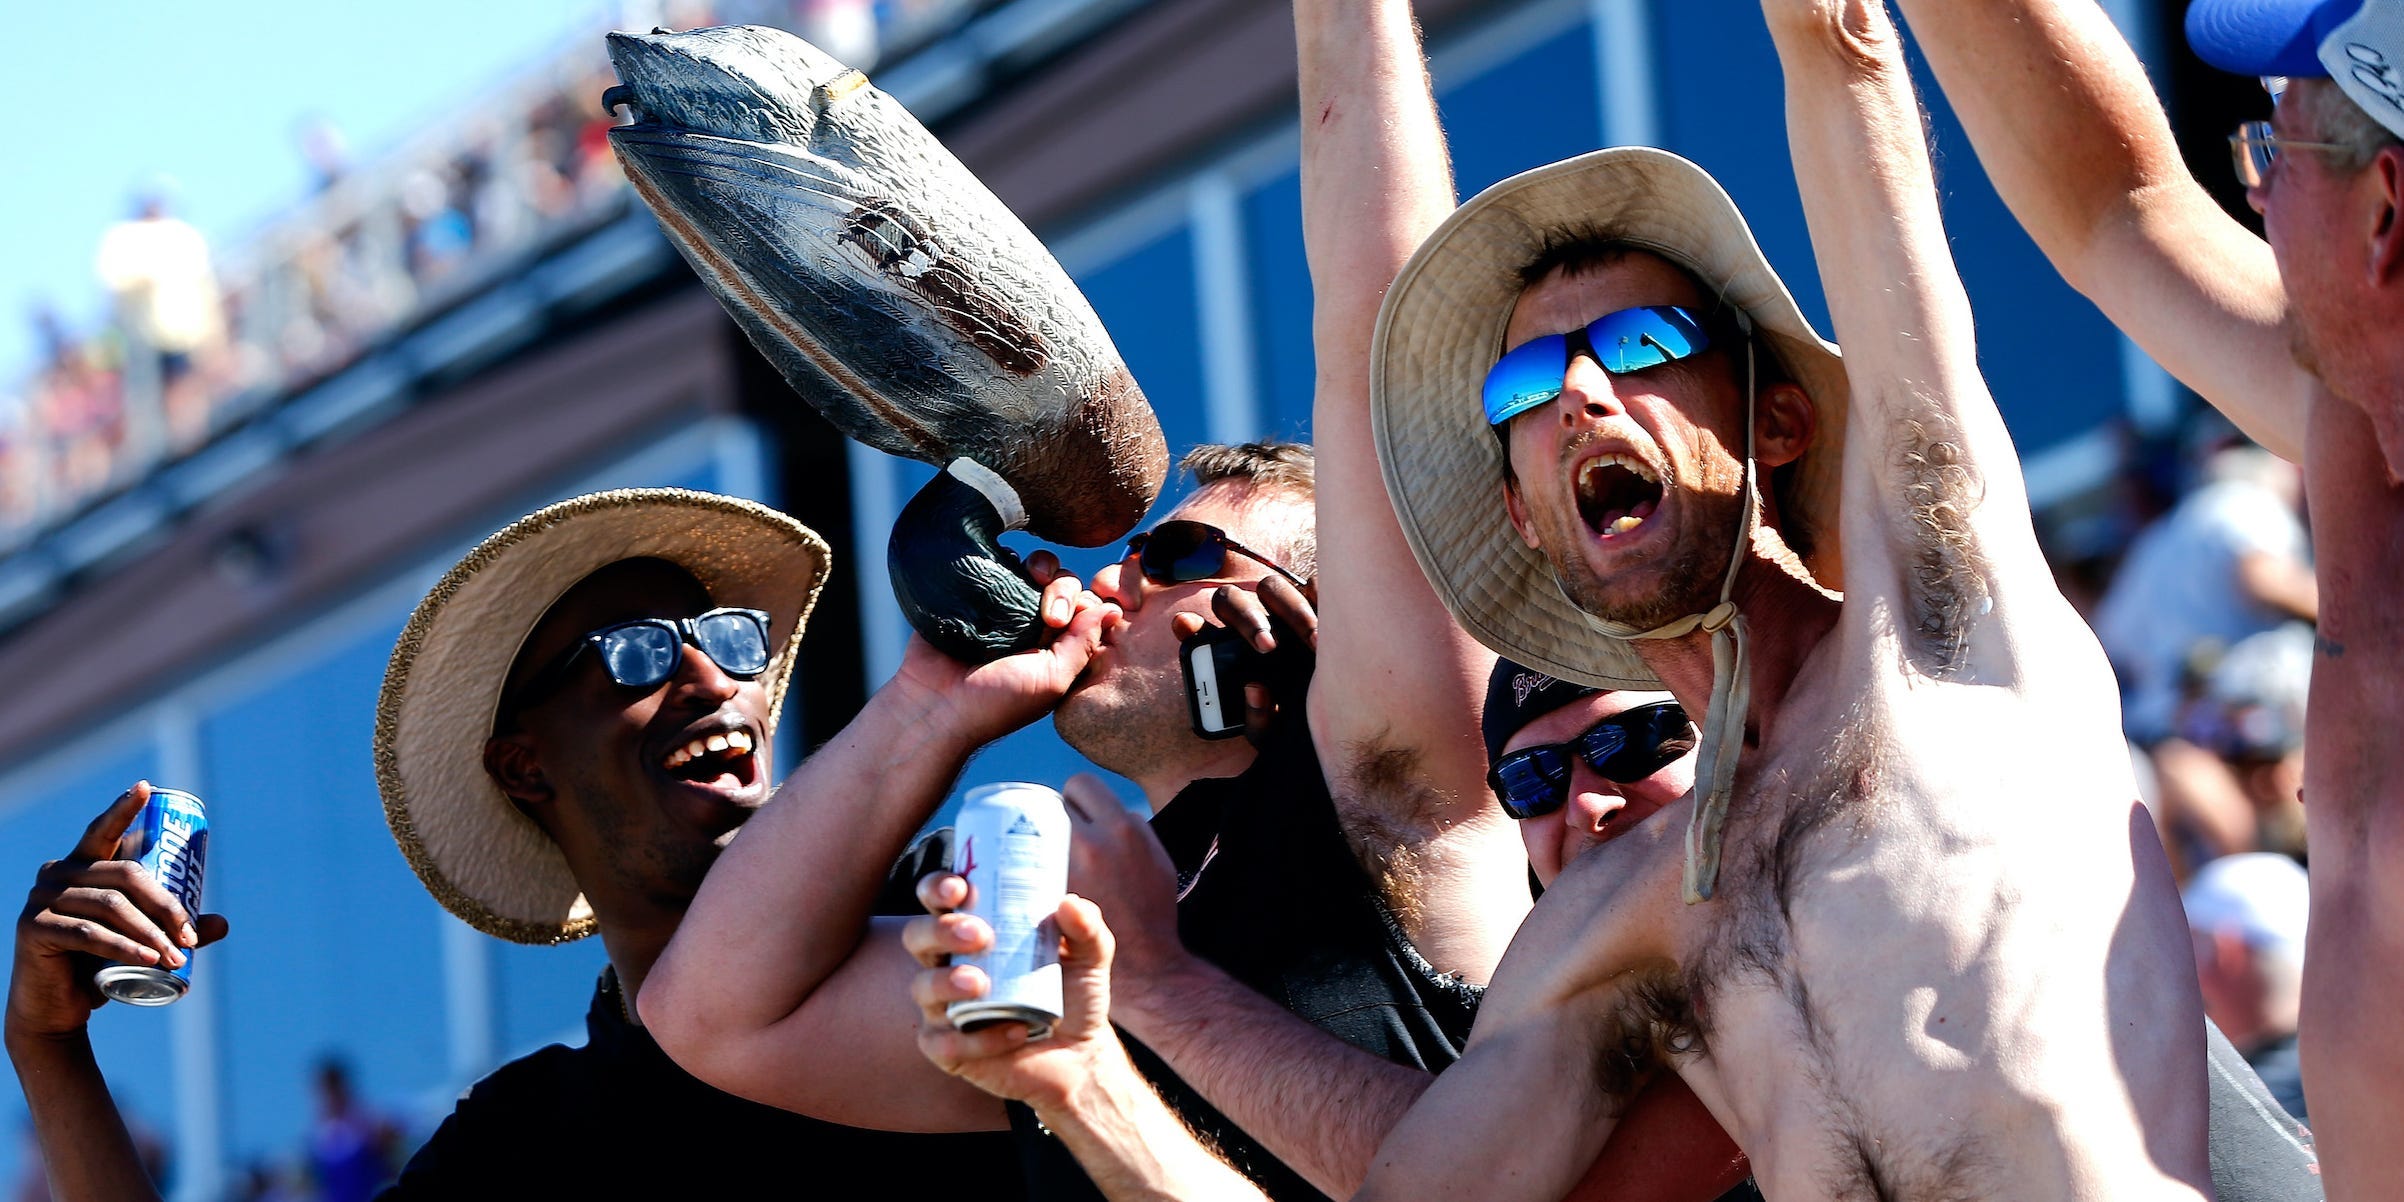 NASCAR fans cheer with their arms in the air. One man, shirtless, holds a beer, while another appears to drink from the bill of an upside down duck.